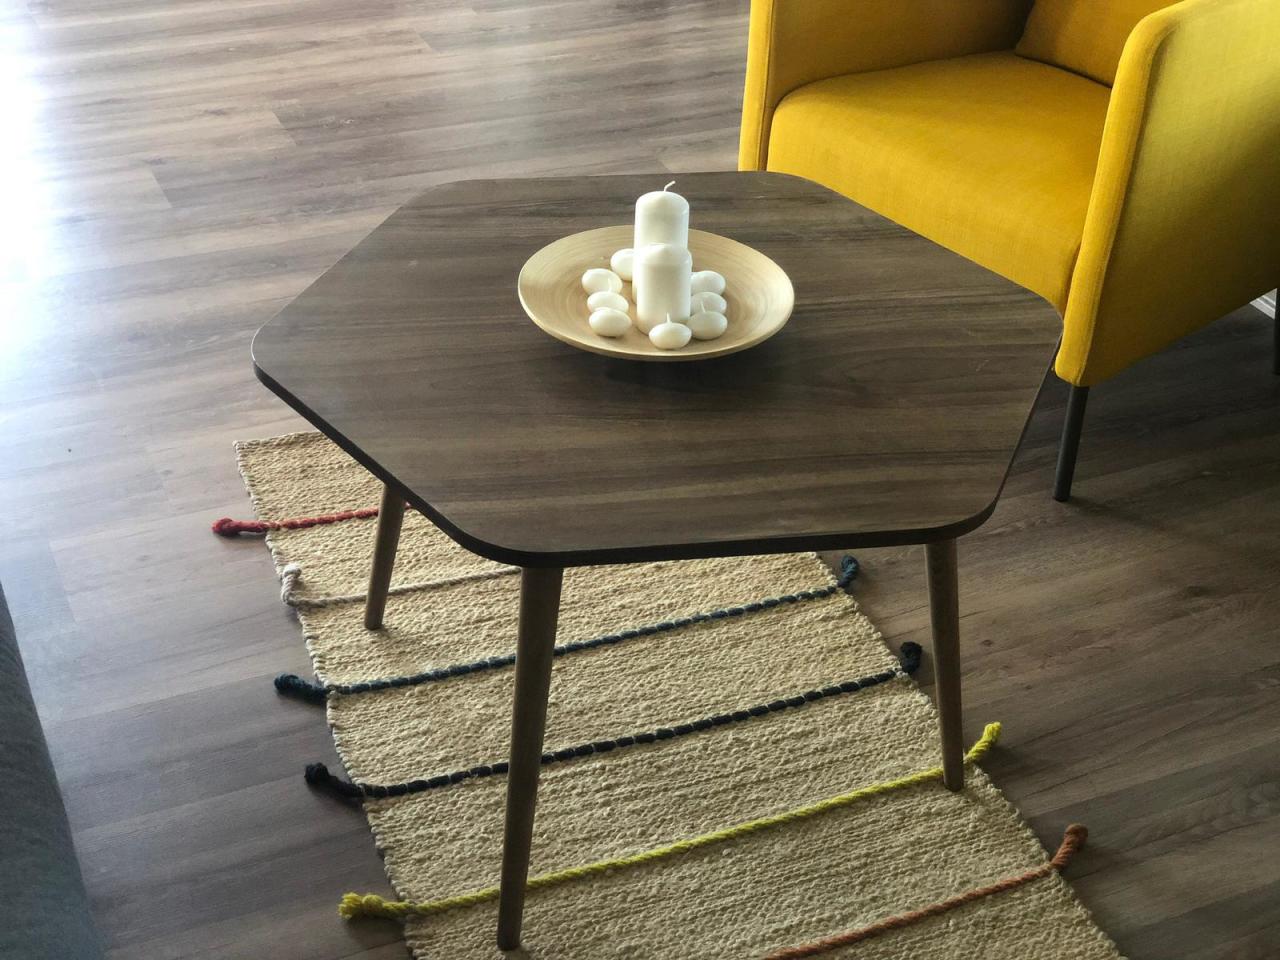 TİTHİS COFFEE TABLE